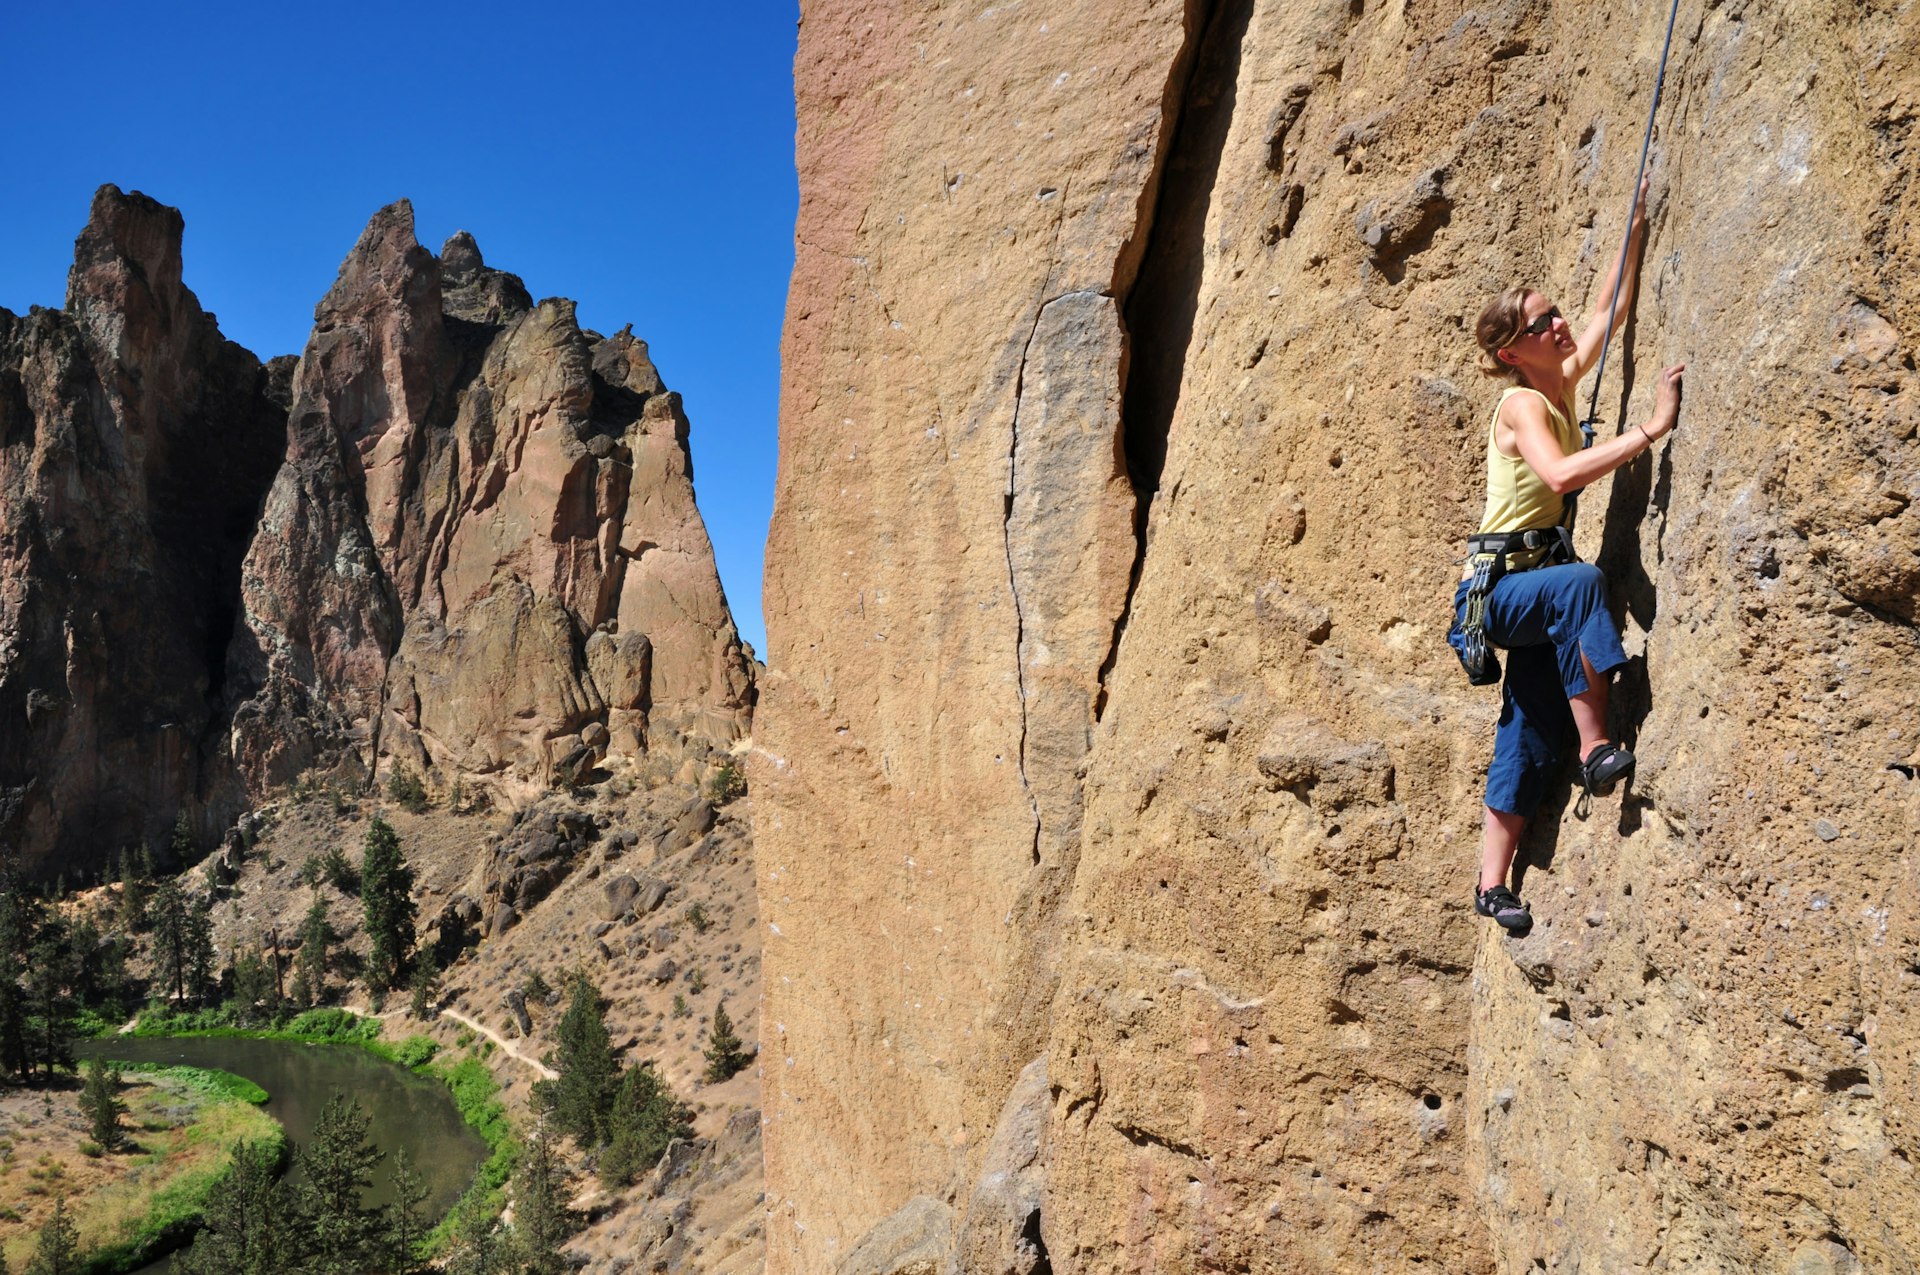 A woman rock climber ascends a cliff at Smith Rock State Park in Oregon.